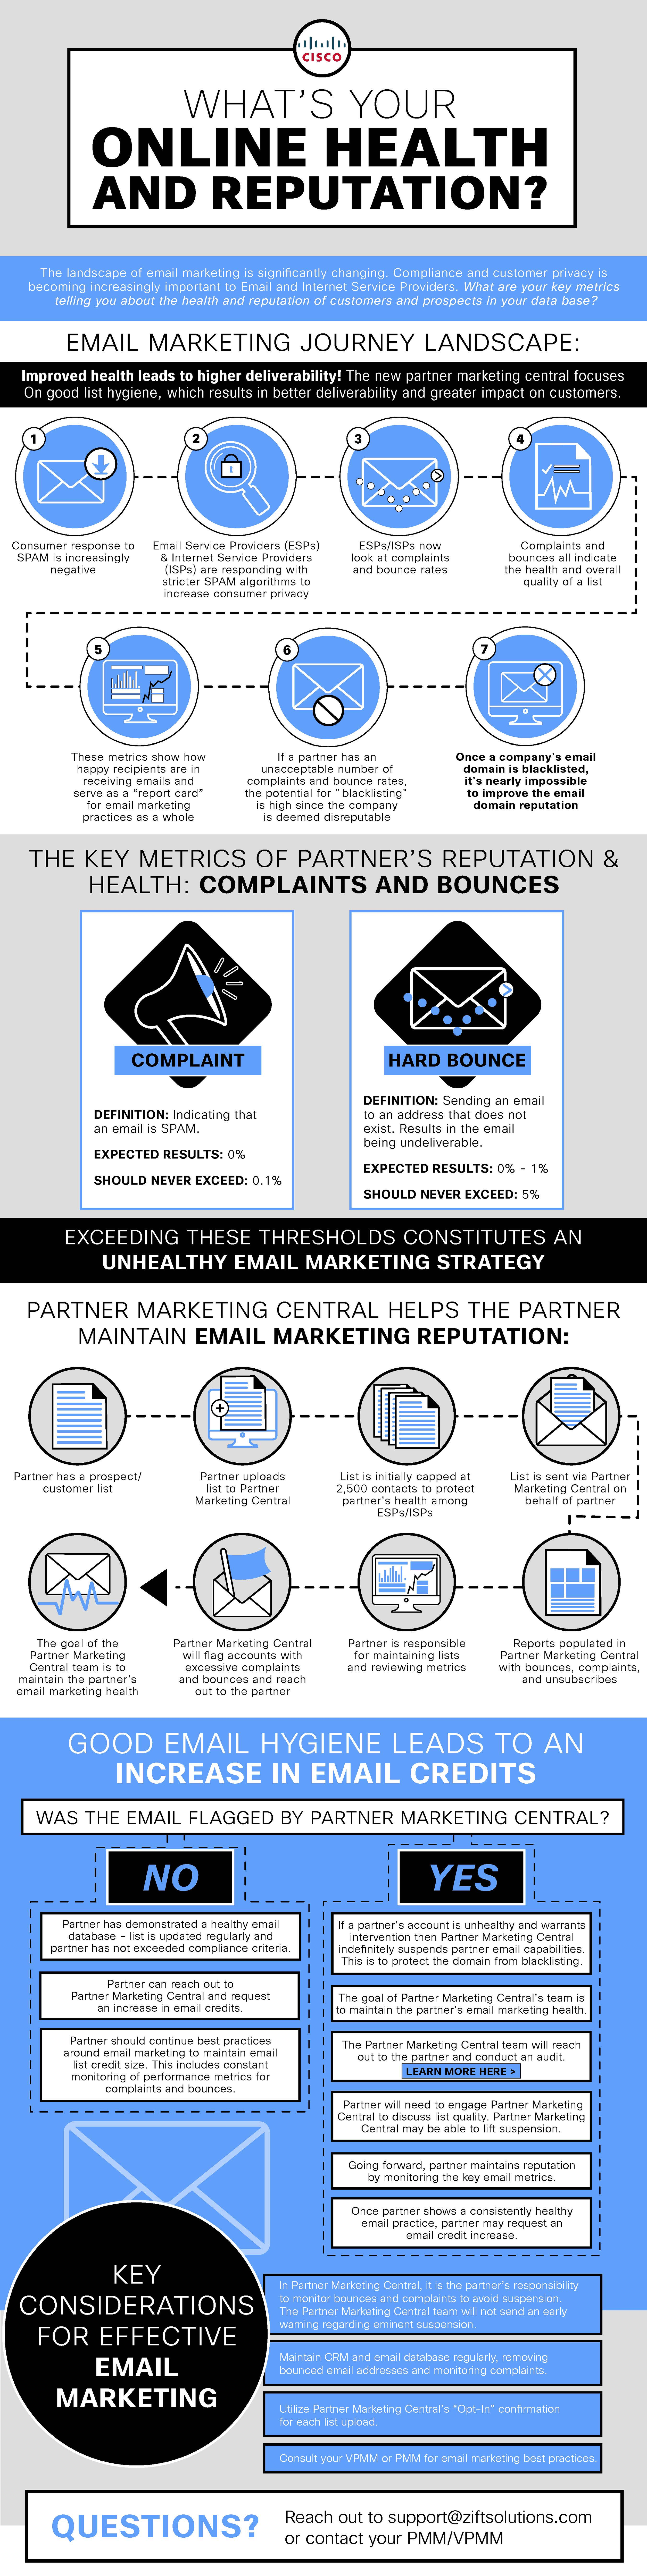 Channel Partner Email Marketing Journey [Infographic]